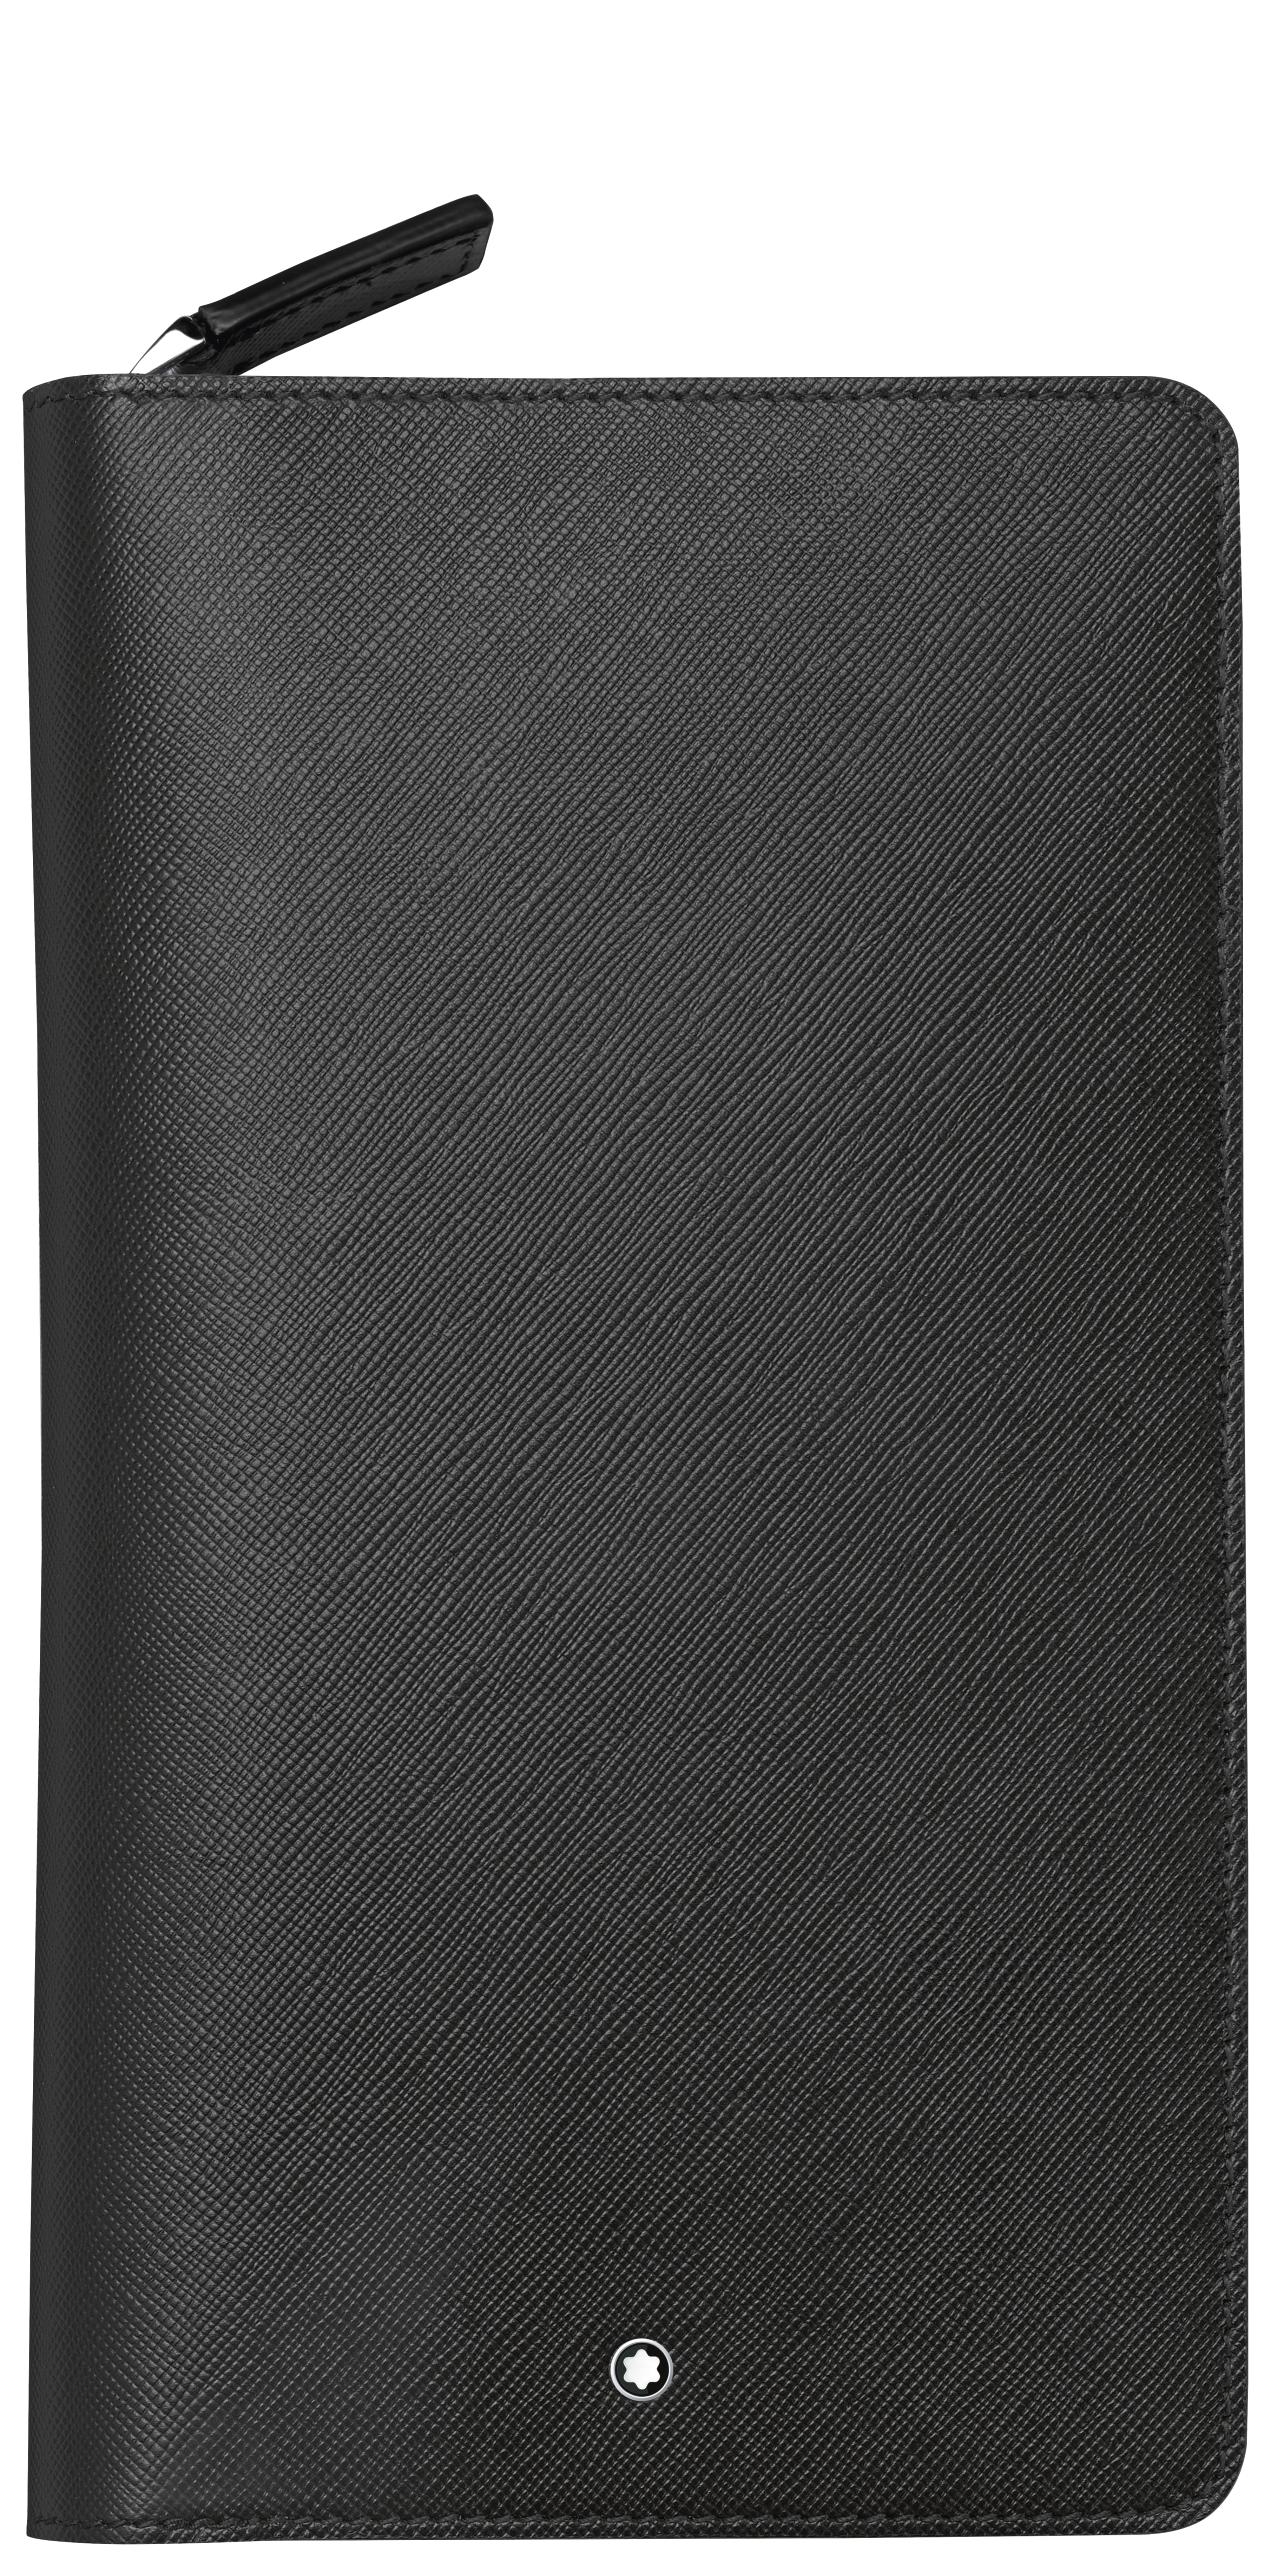 Montblanc Sartorial Travel Wallet 16cc with Zip • Jewels in Paradise